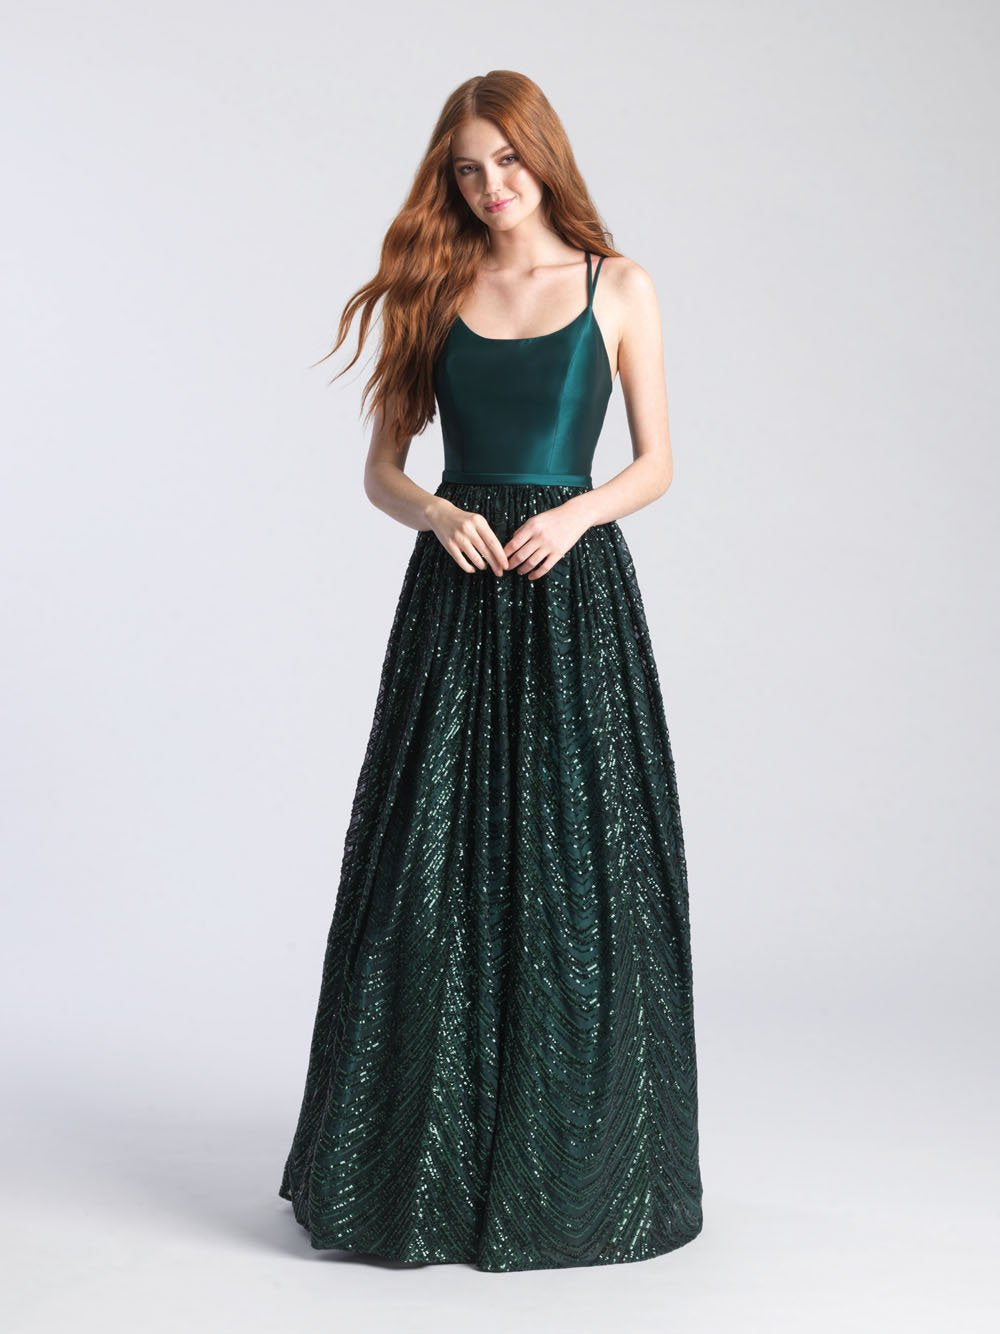 Madison James 20-363 dress images in these colors: Black, Green, Red, Royal.